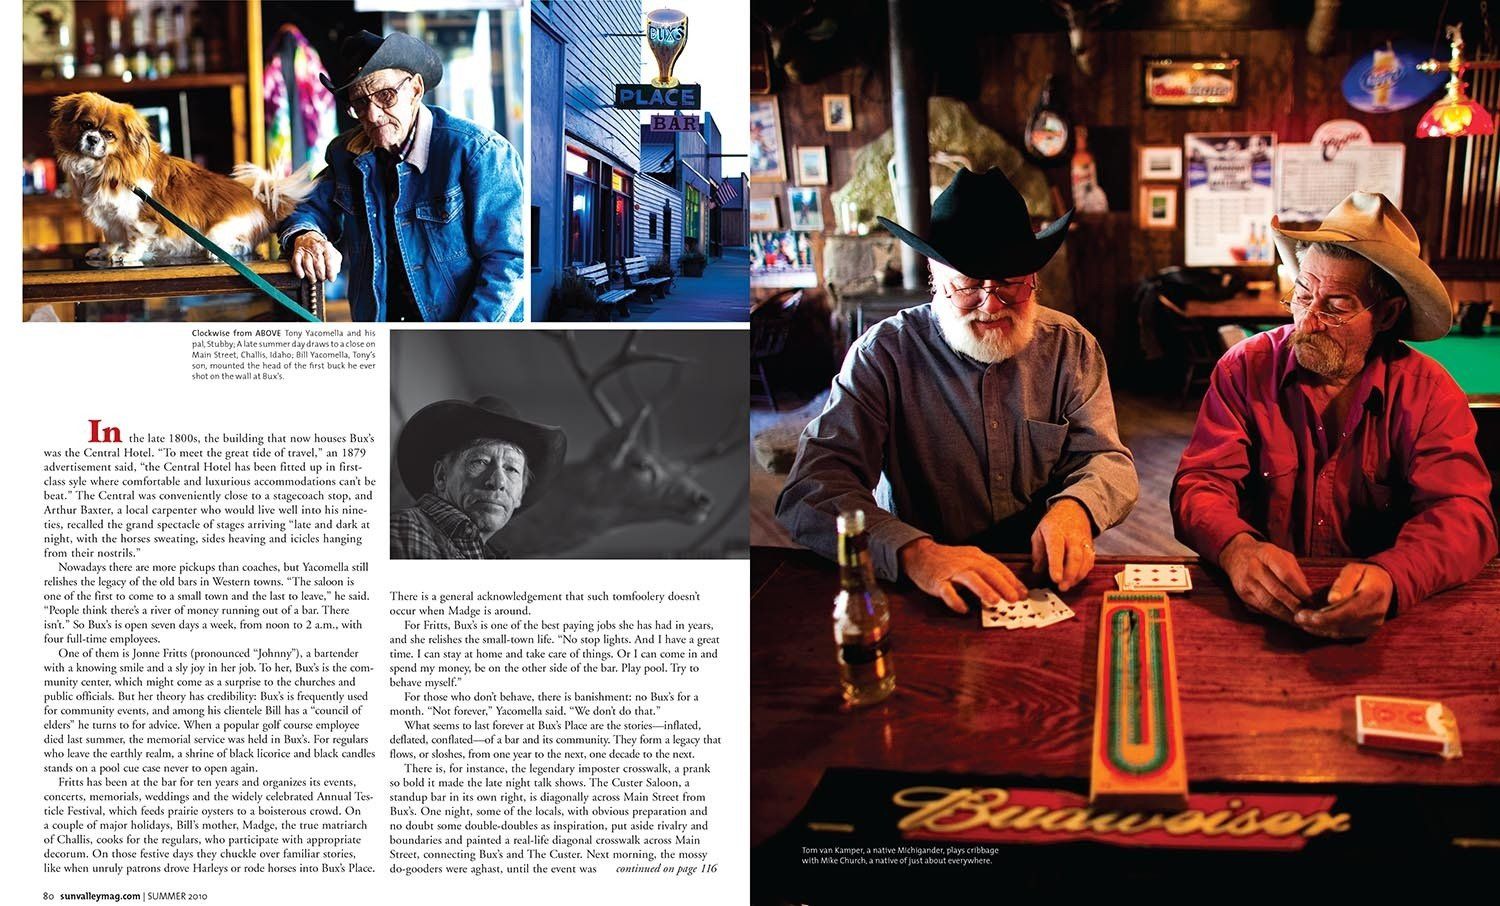 Editorial assignment, Sun Valley Magazine, small bar, rural, idaho, Challis, Bux's Place